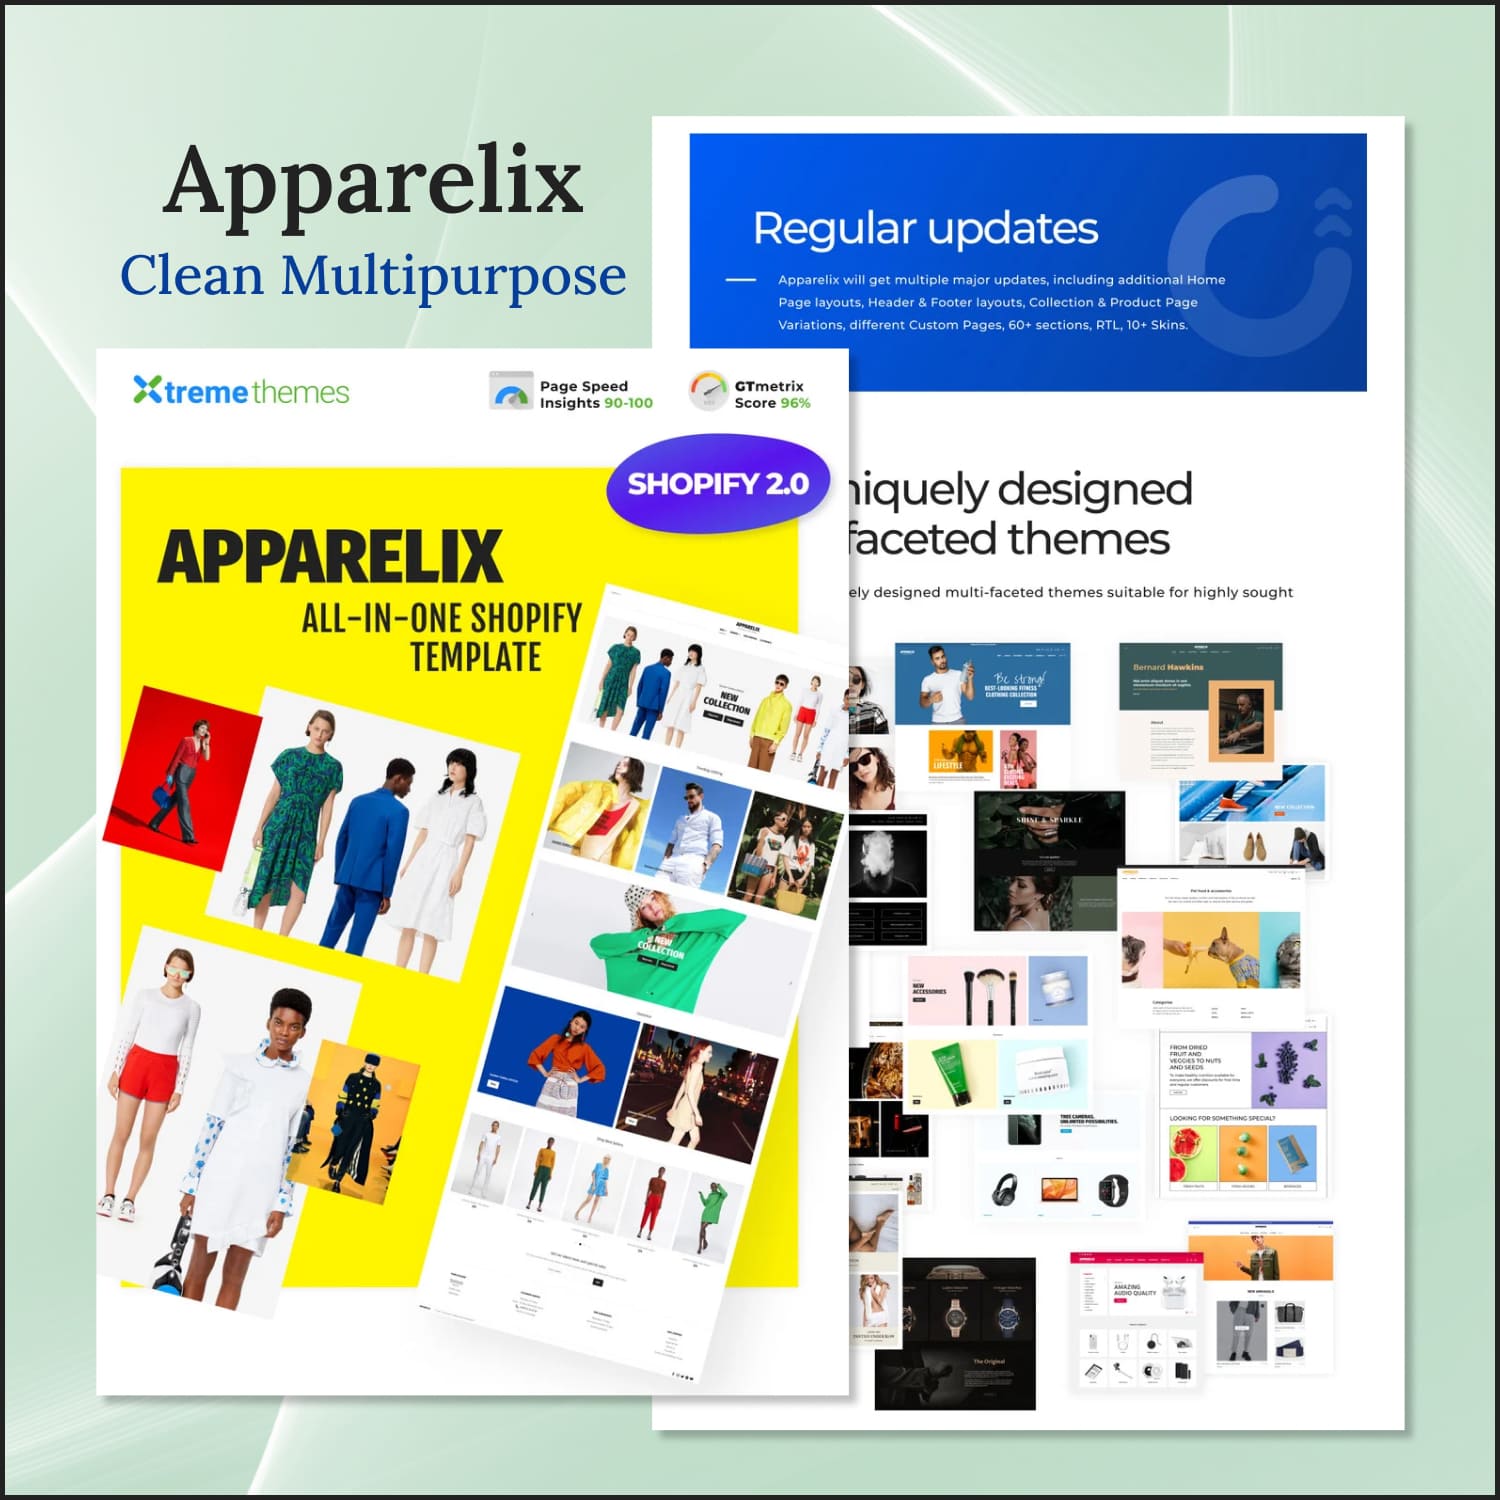 Apparelix clean multipurpose shopify theme, first main picture 1500x1500.